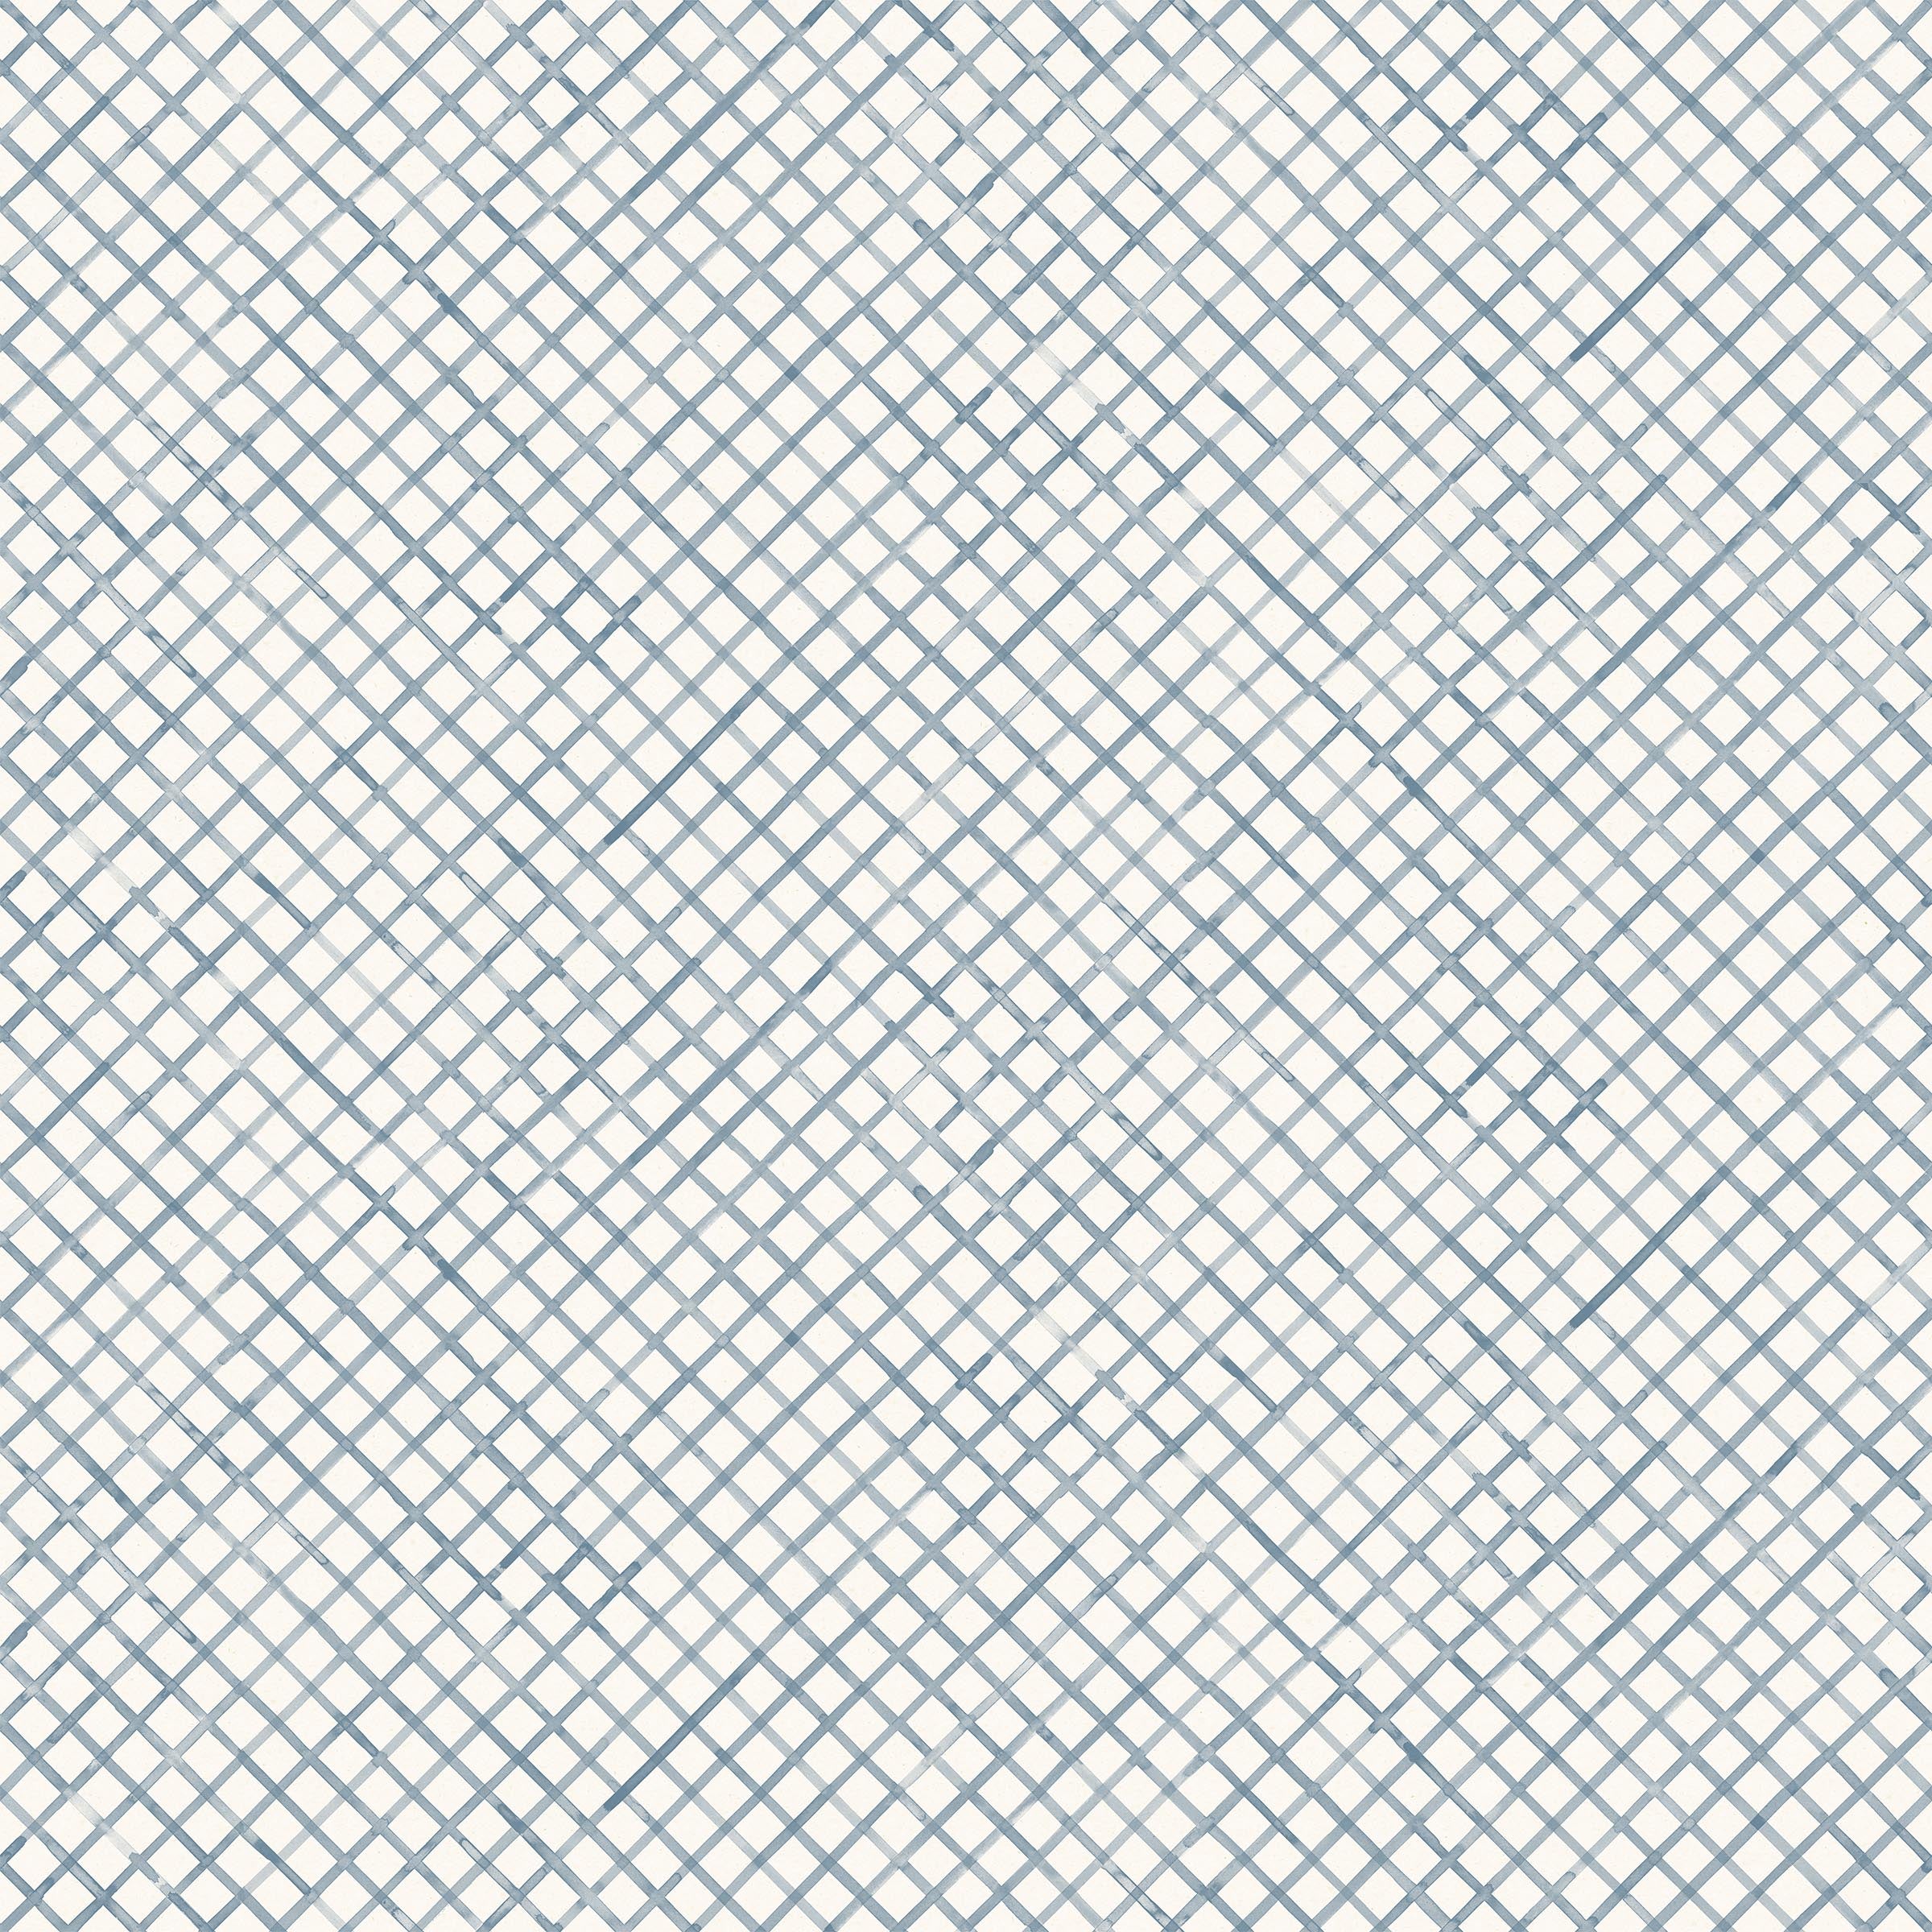 Detail of wallpaper in a painterly grid pattern in navy on a white field.